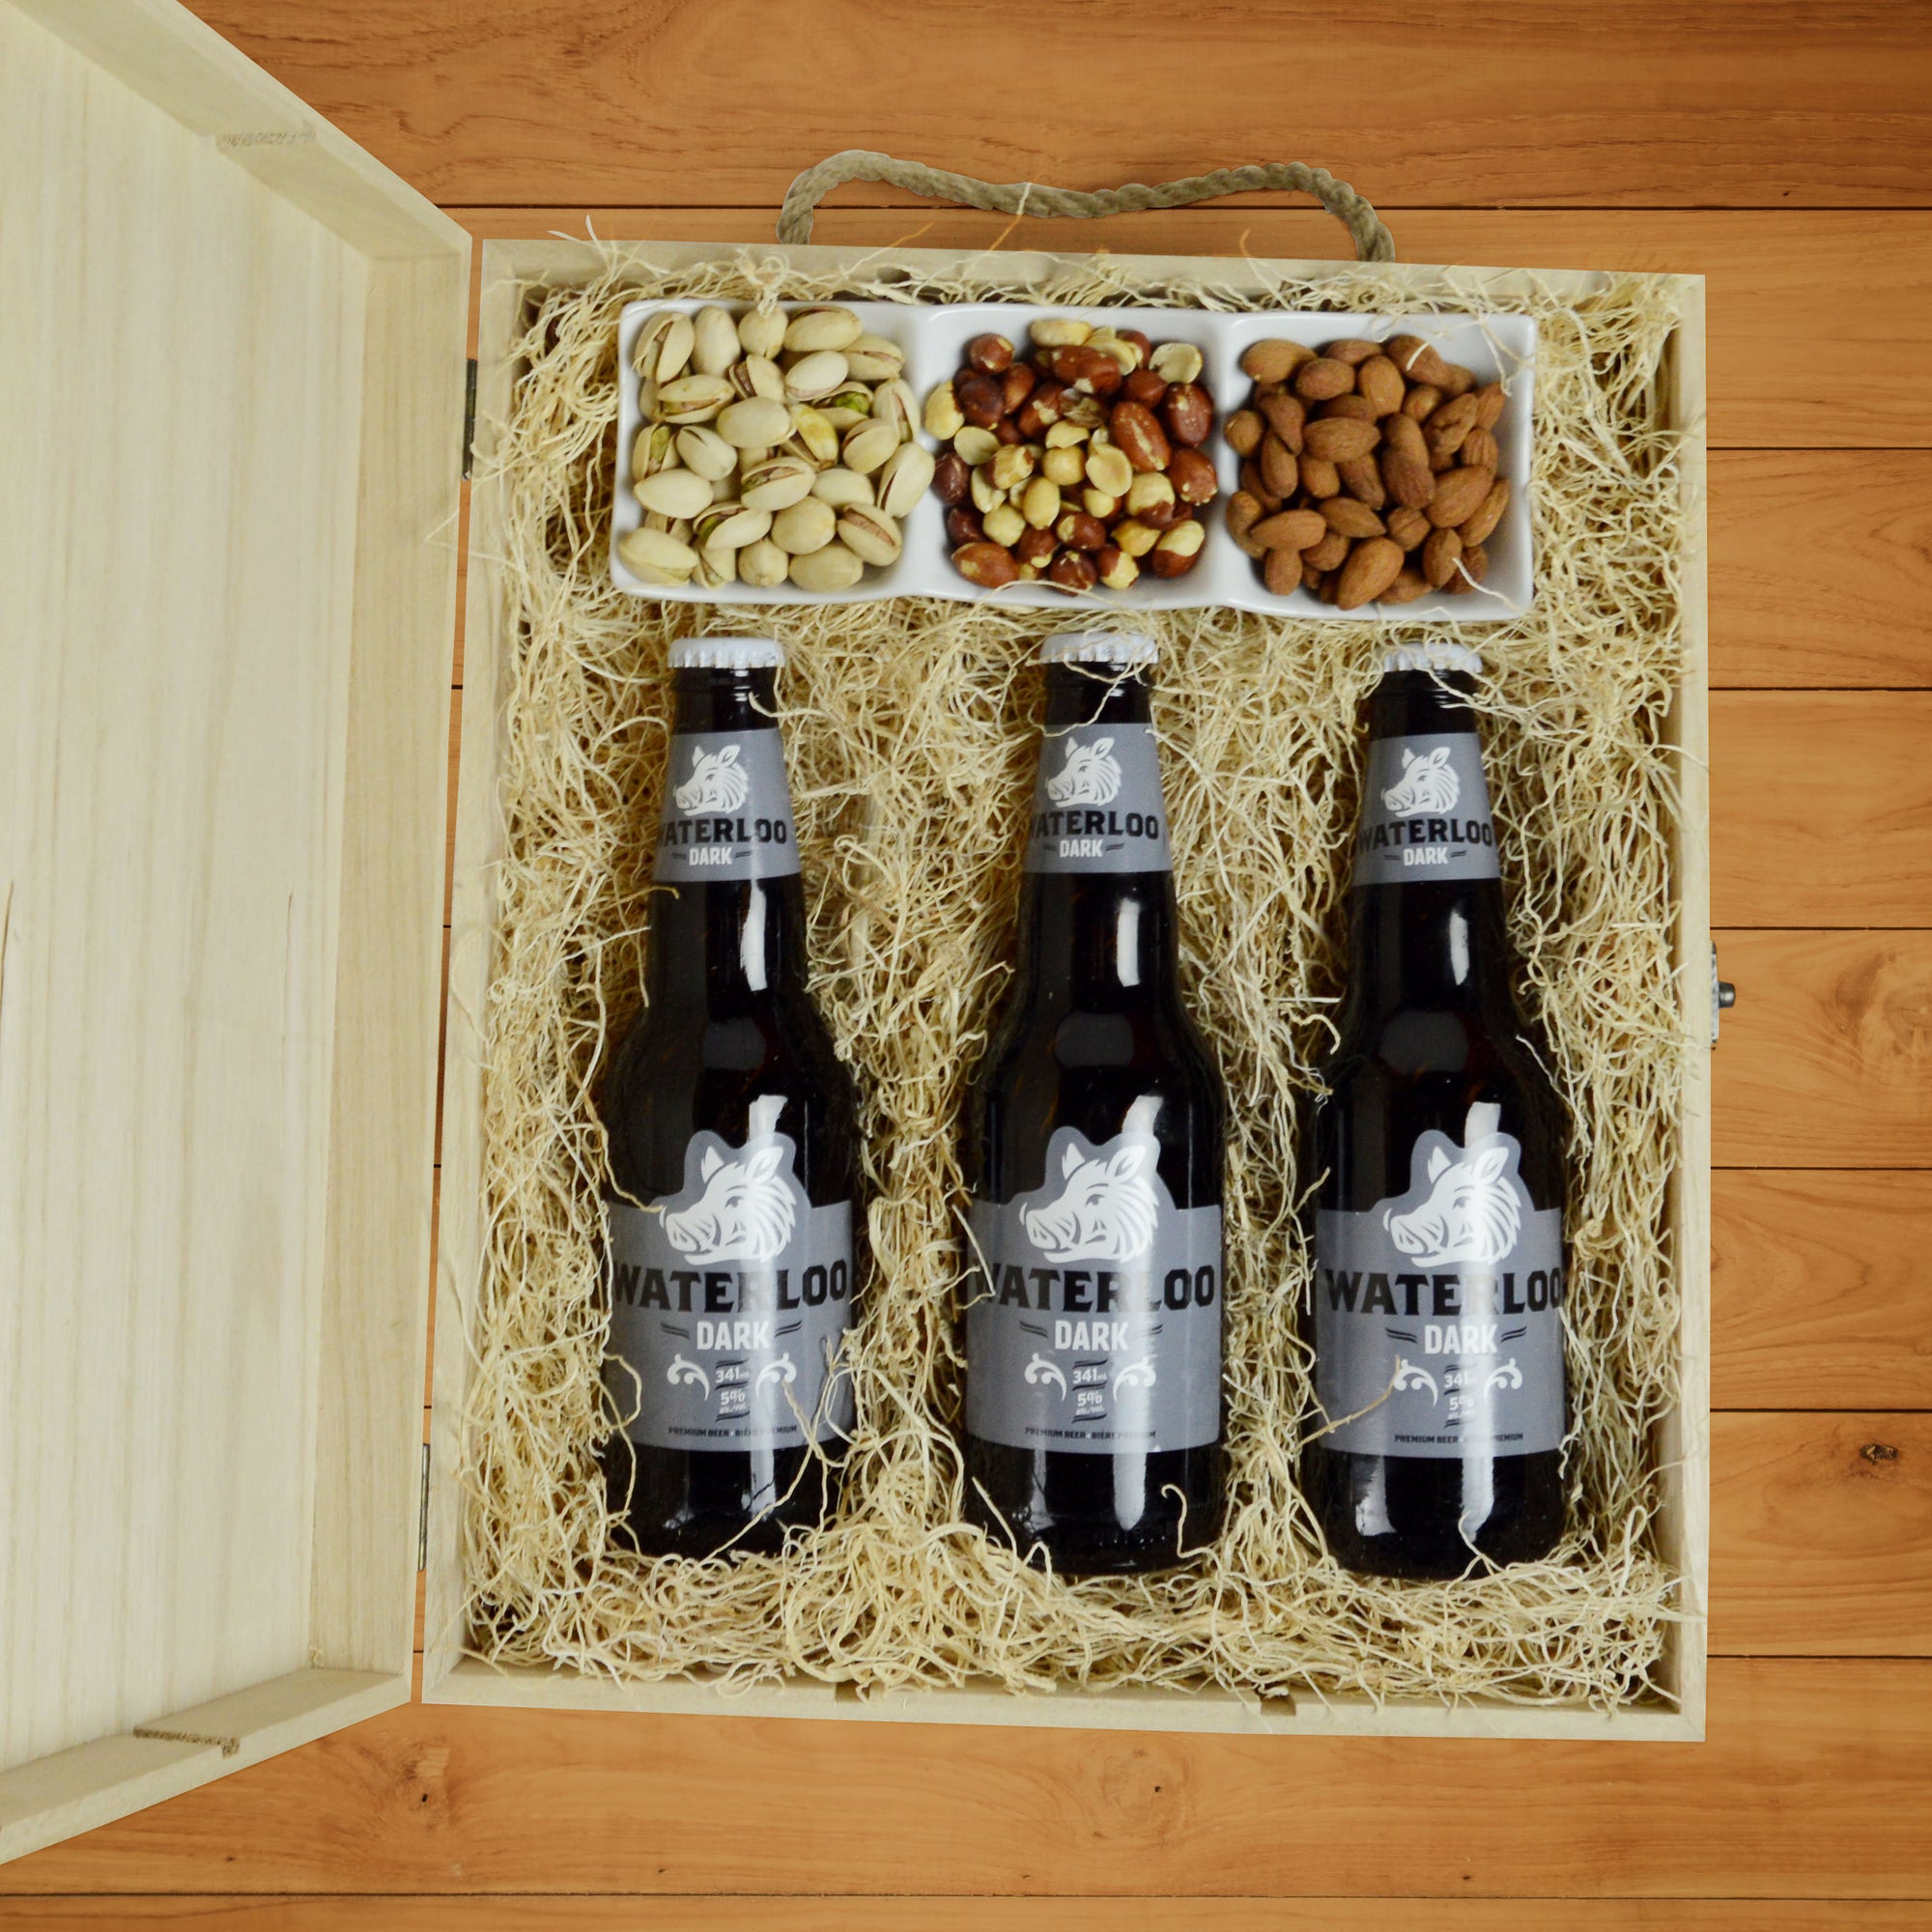 Beer Gift Baskets - The Ultimate Beer Gift Basket - Mutts & Mousers USA